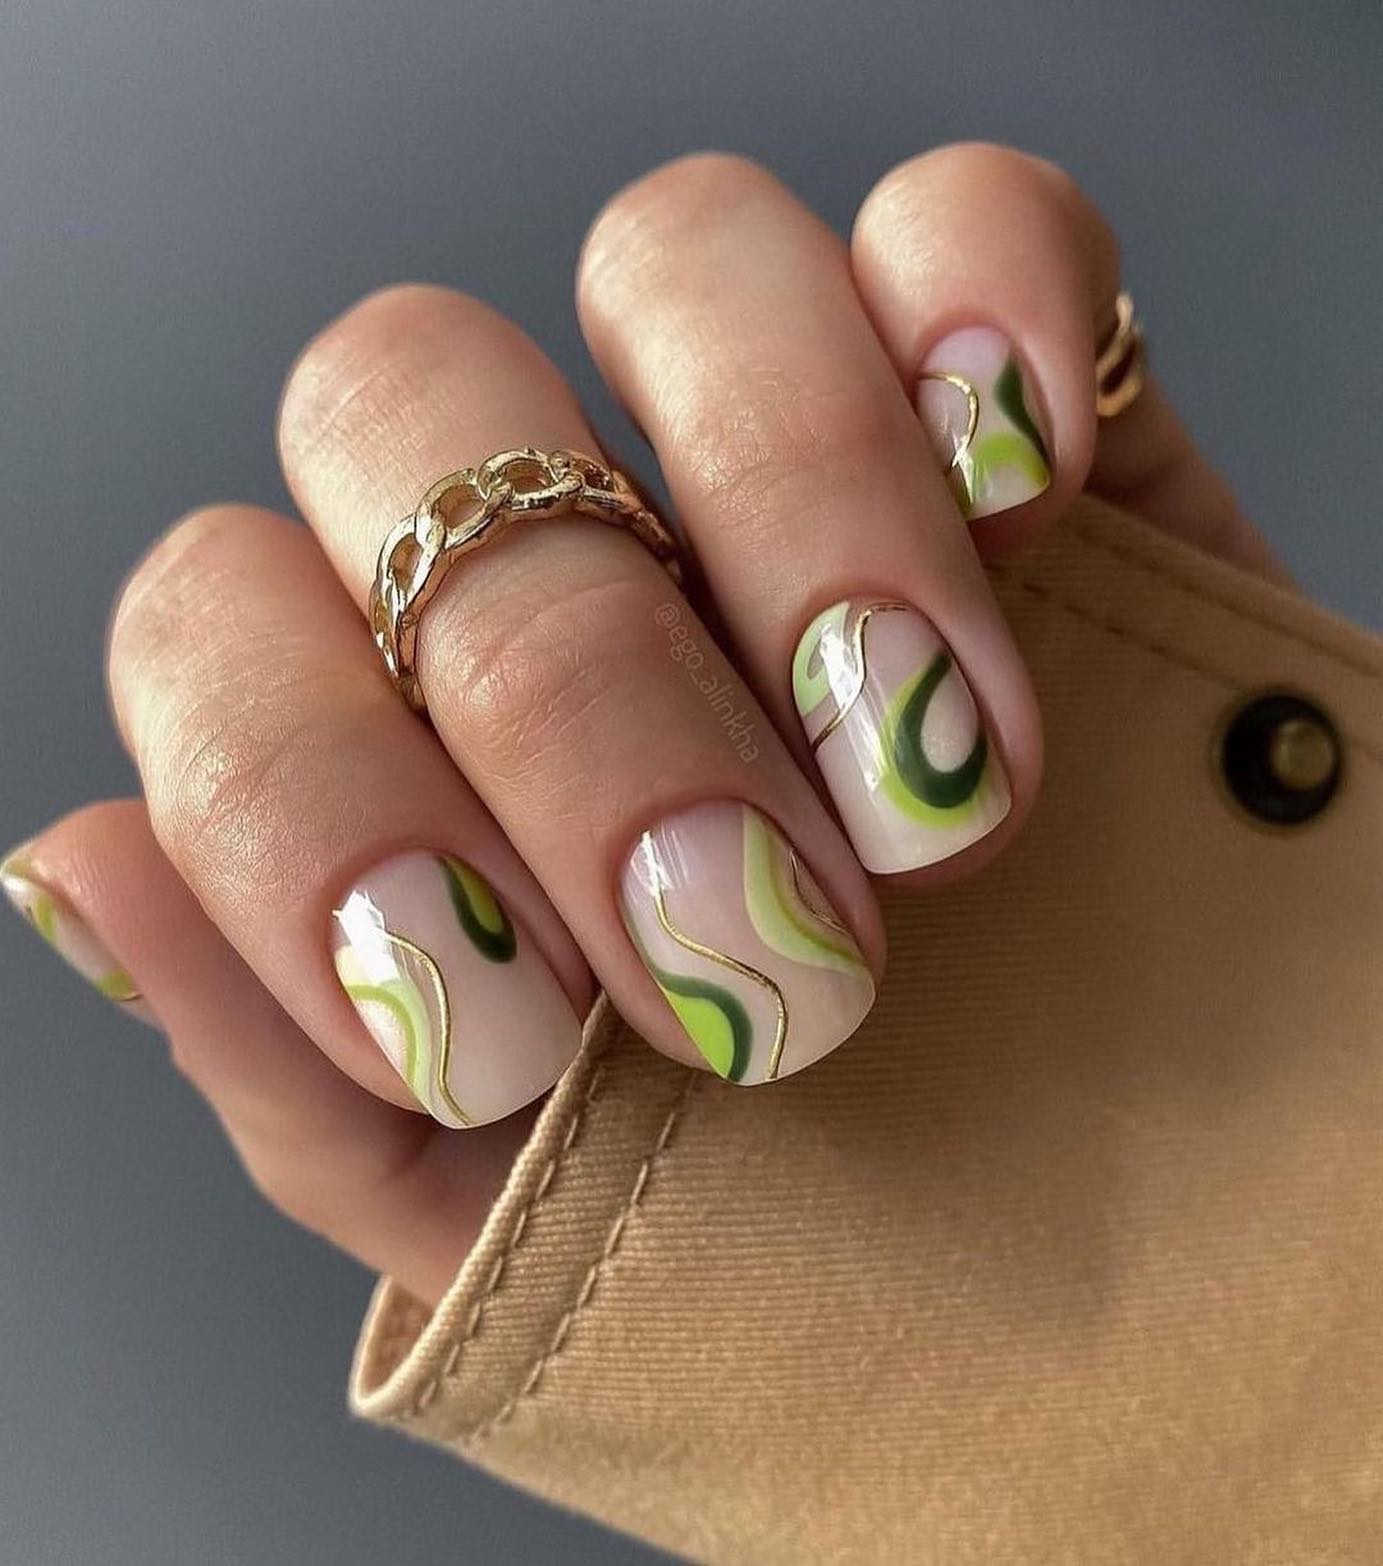 100 Pretty Spring Nail Designs To Try This Year images 92